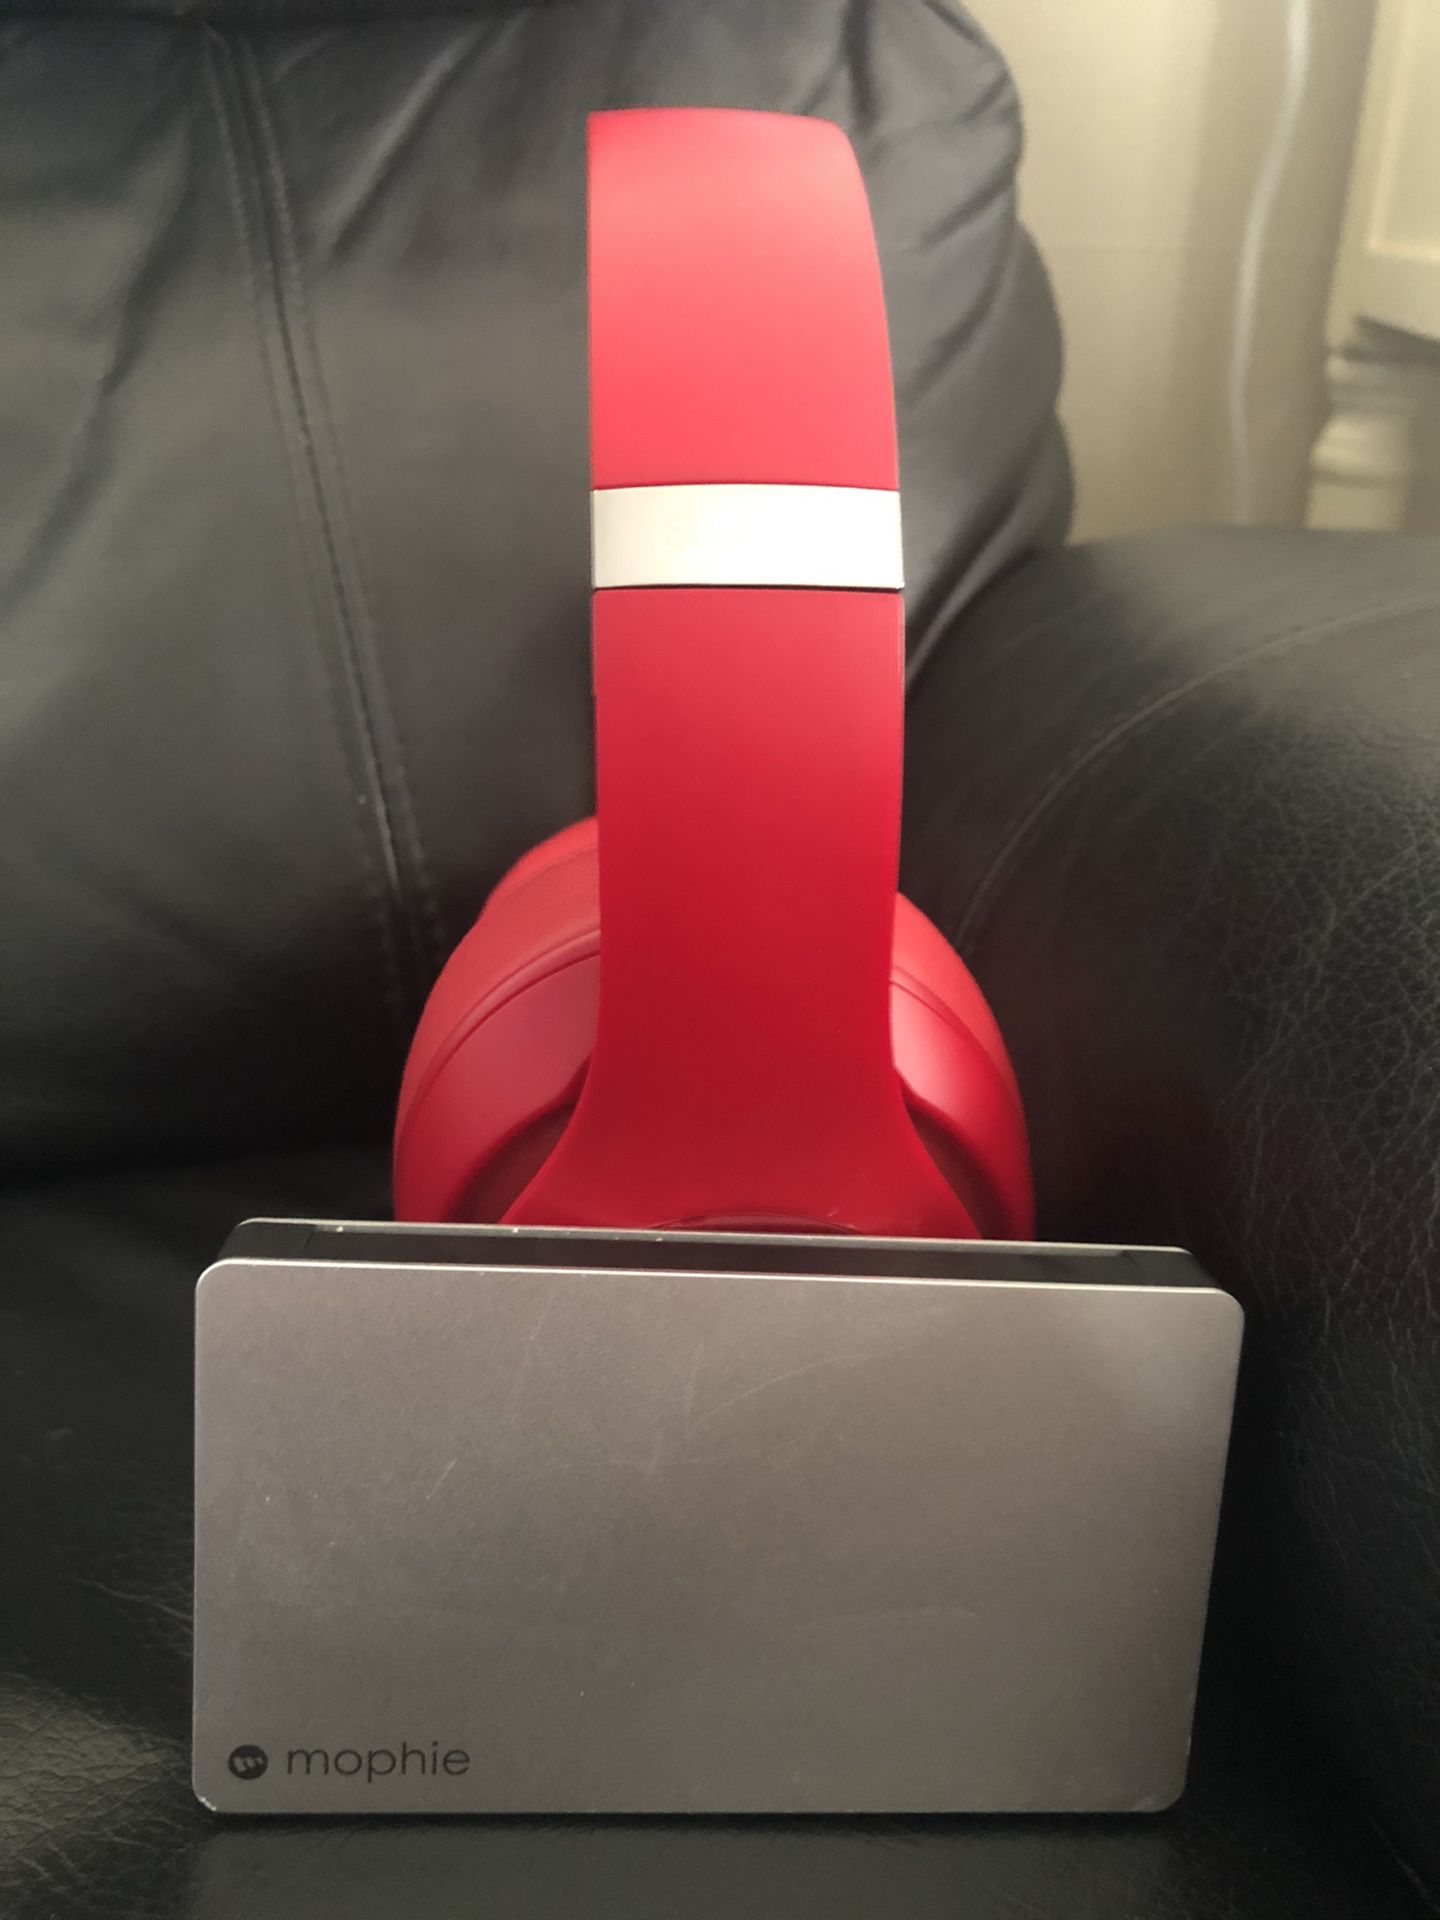 Brand new beats Bluetooth studio 3 headphones with portable morphie charger